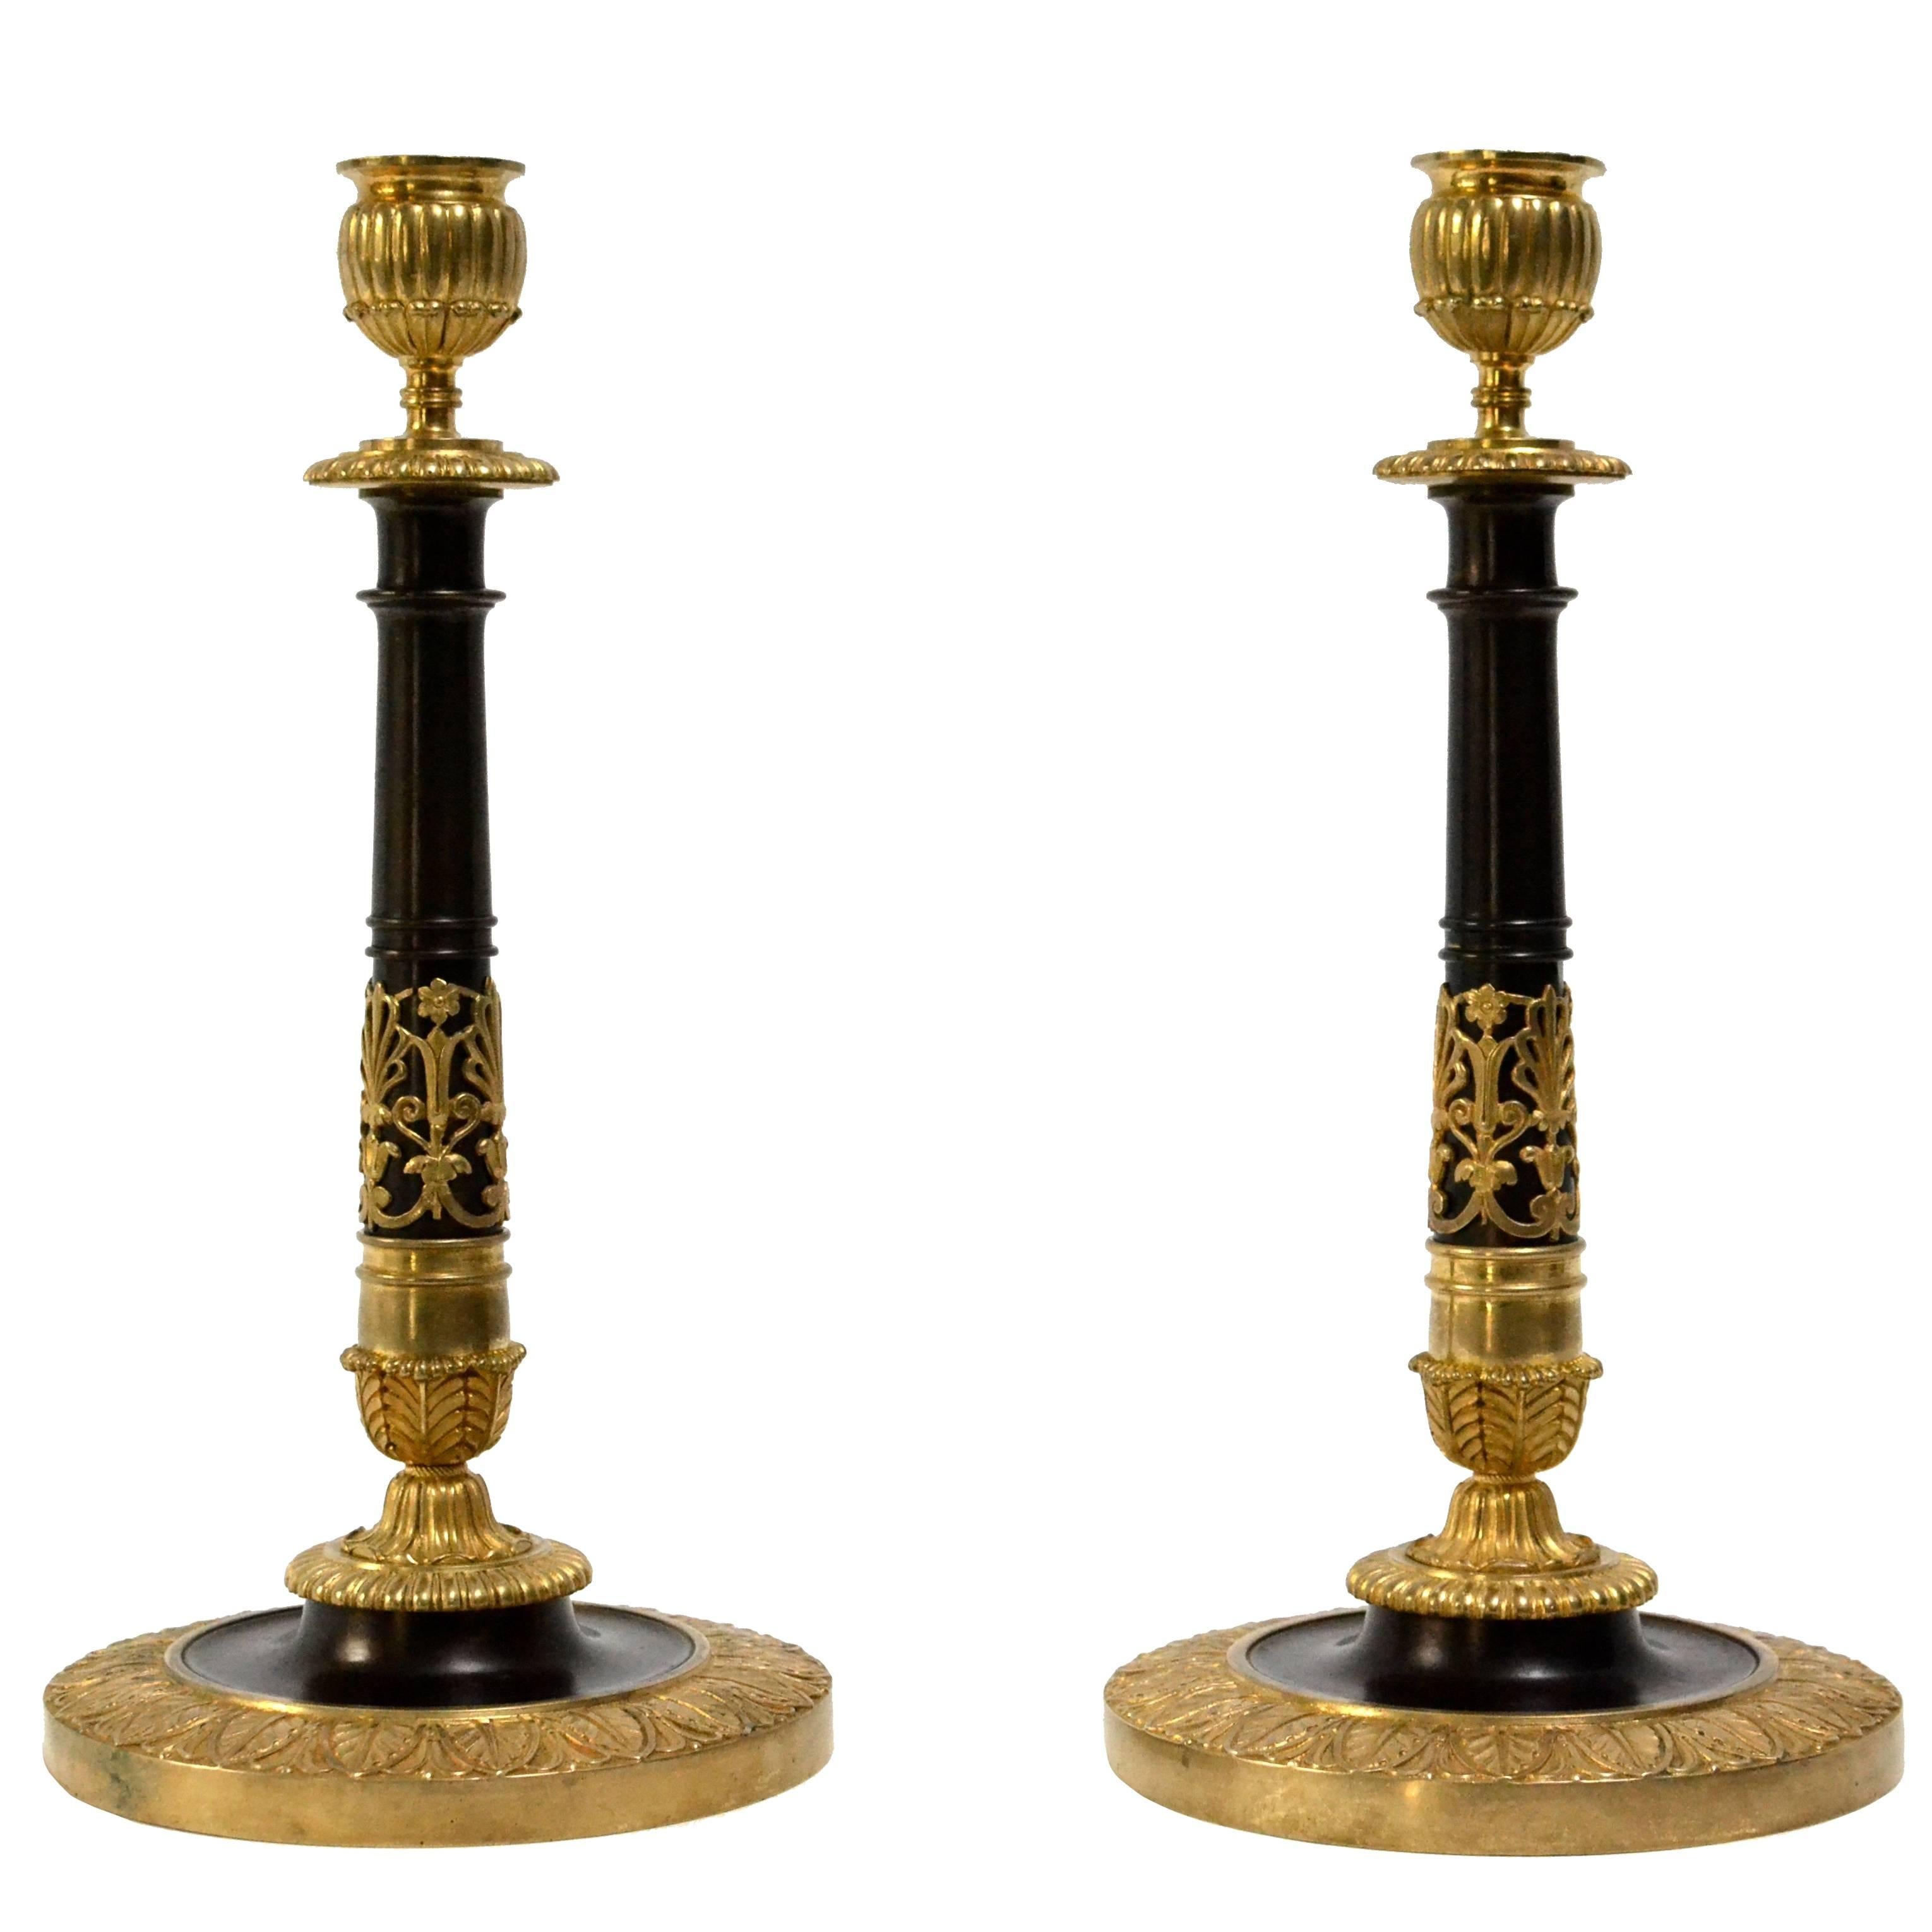 Pair of Gilt and Patinated Bronze Candlesticks, Early 19th Century